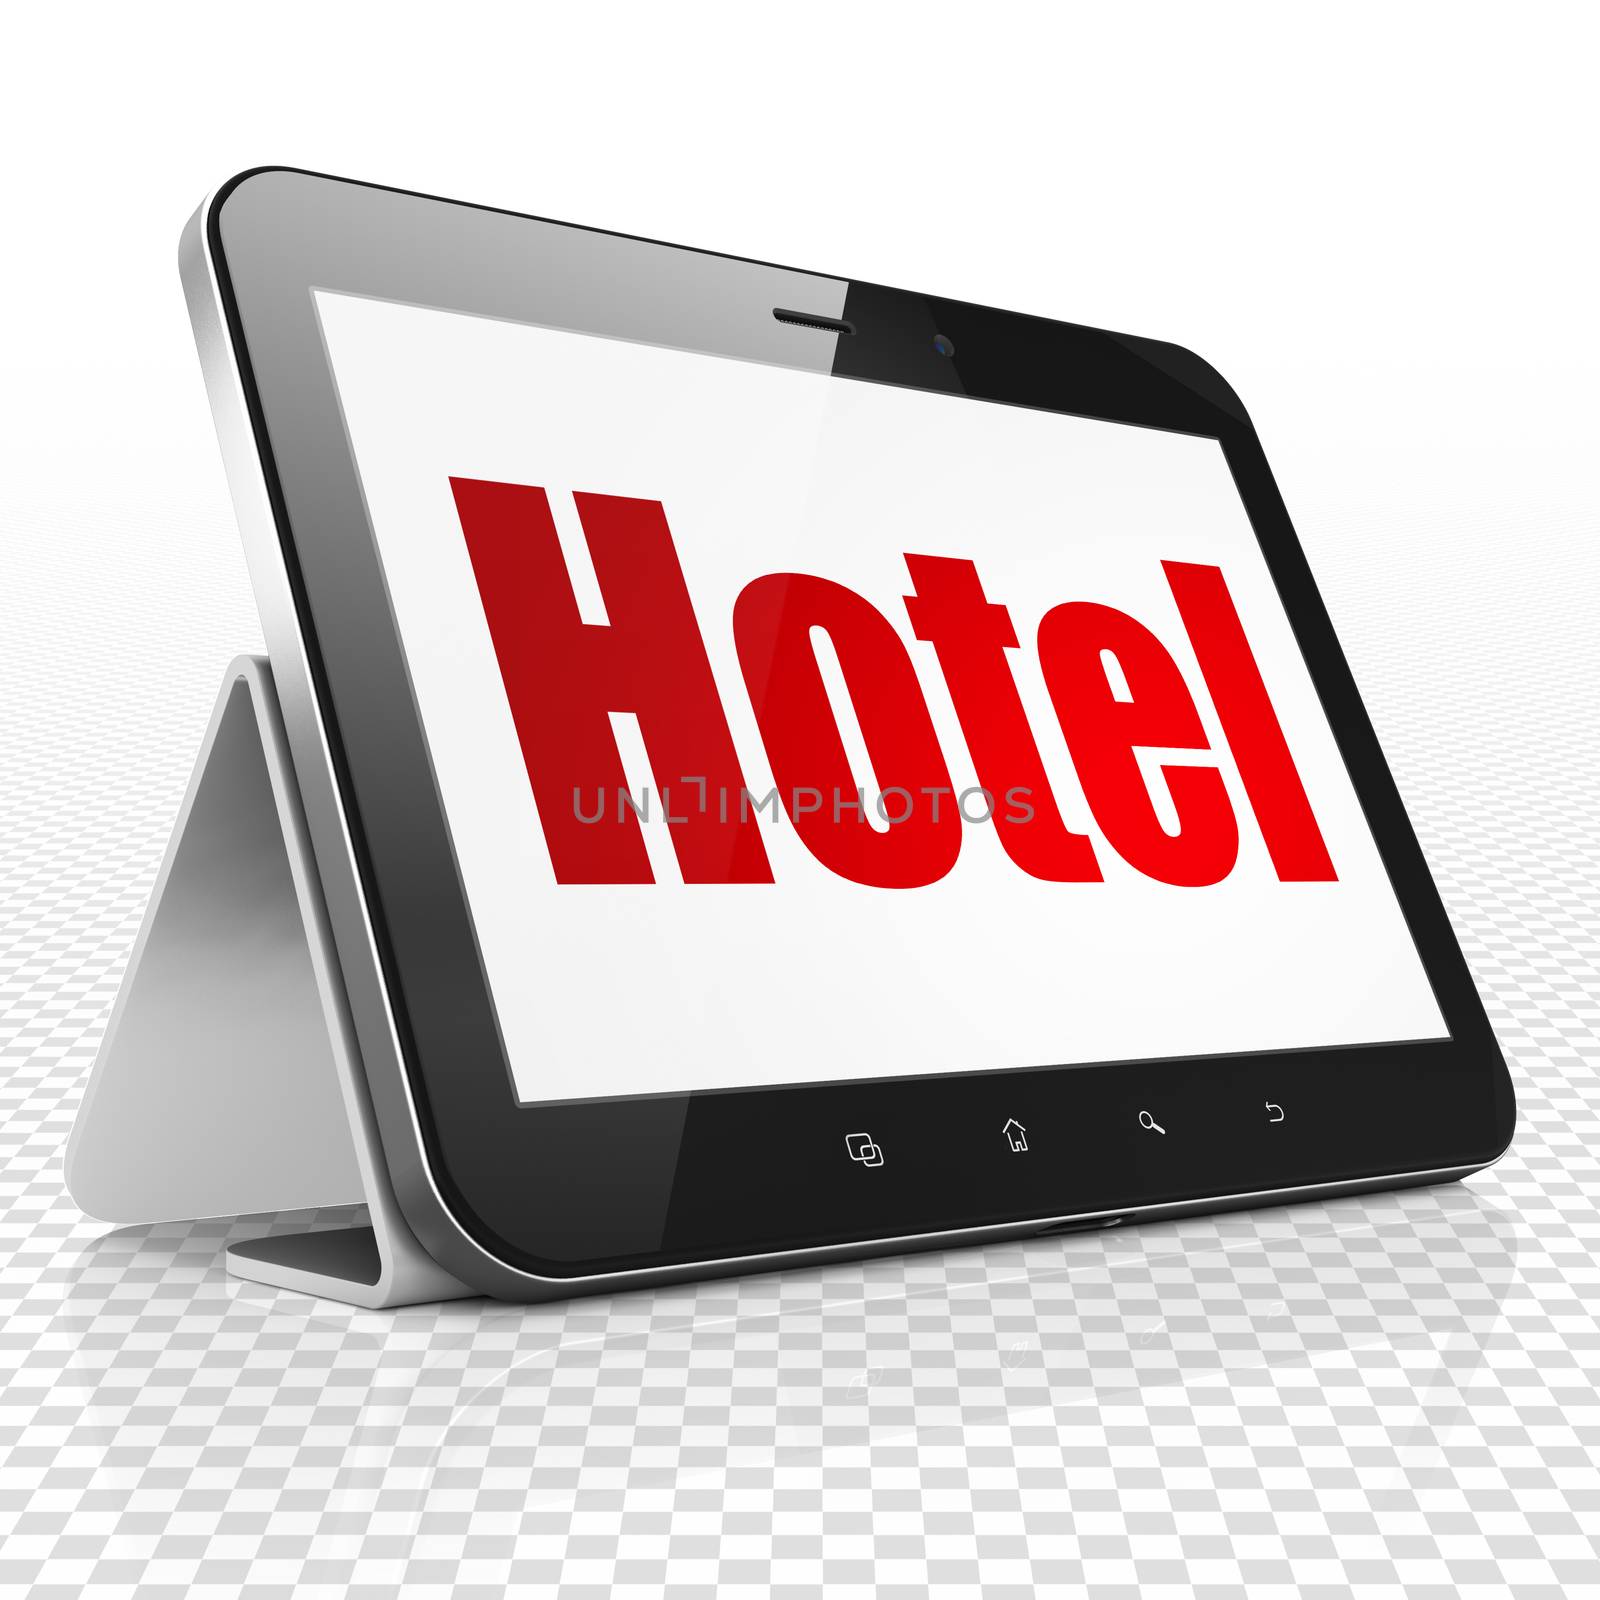 Vacation concept: Tablet Computer with red text Hotel on display, 3D rendering